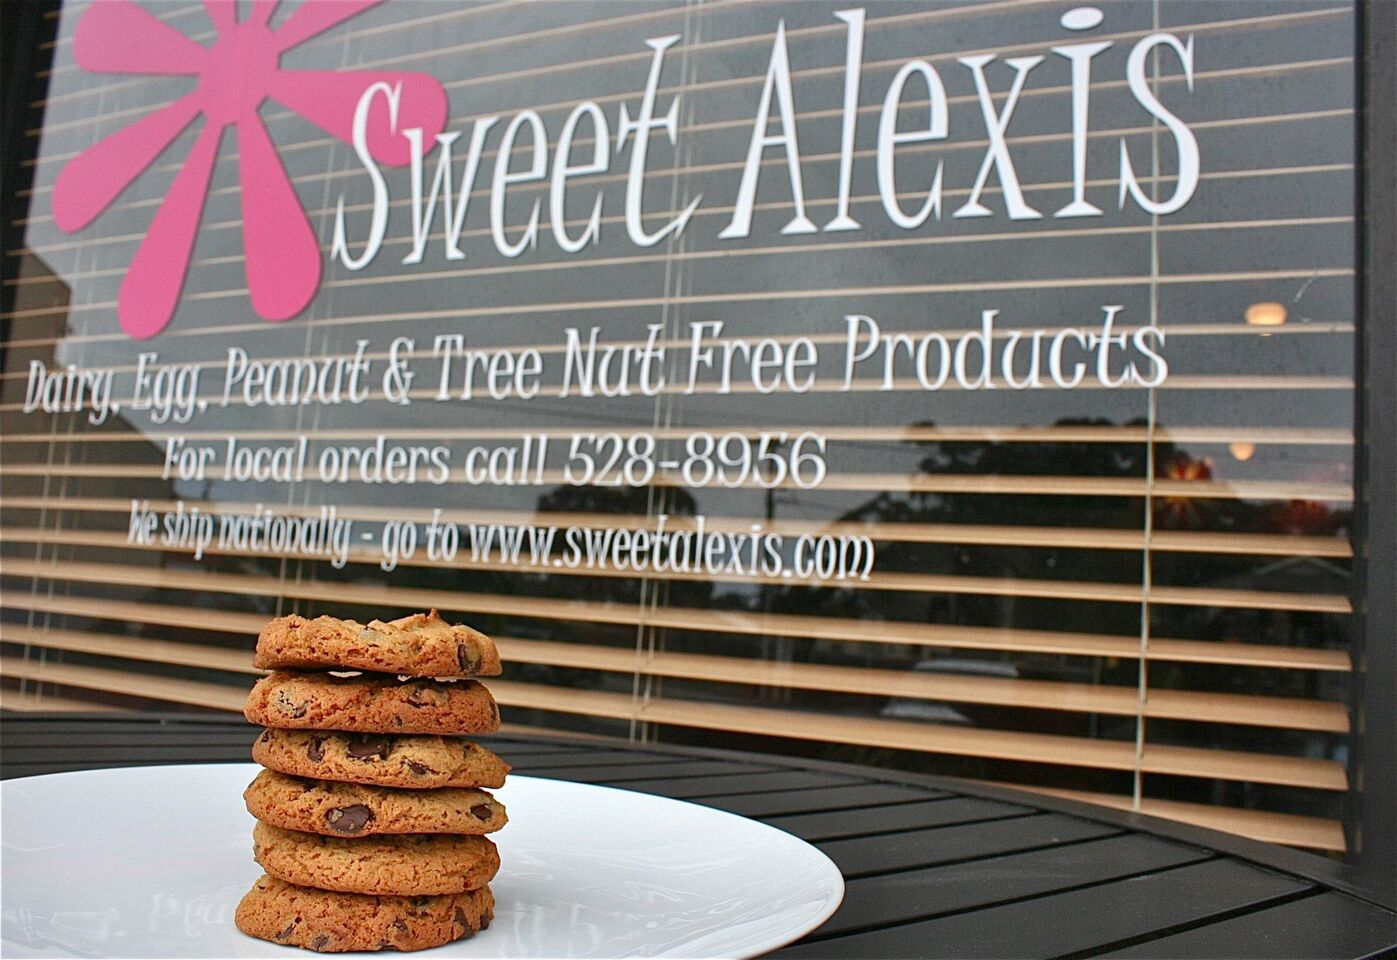 A photo of Sweet Alexis Bakery